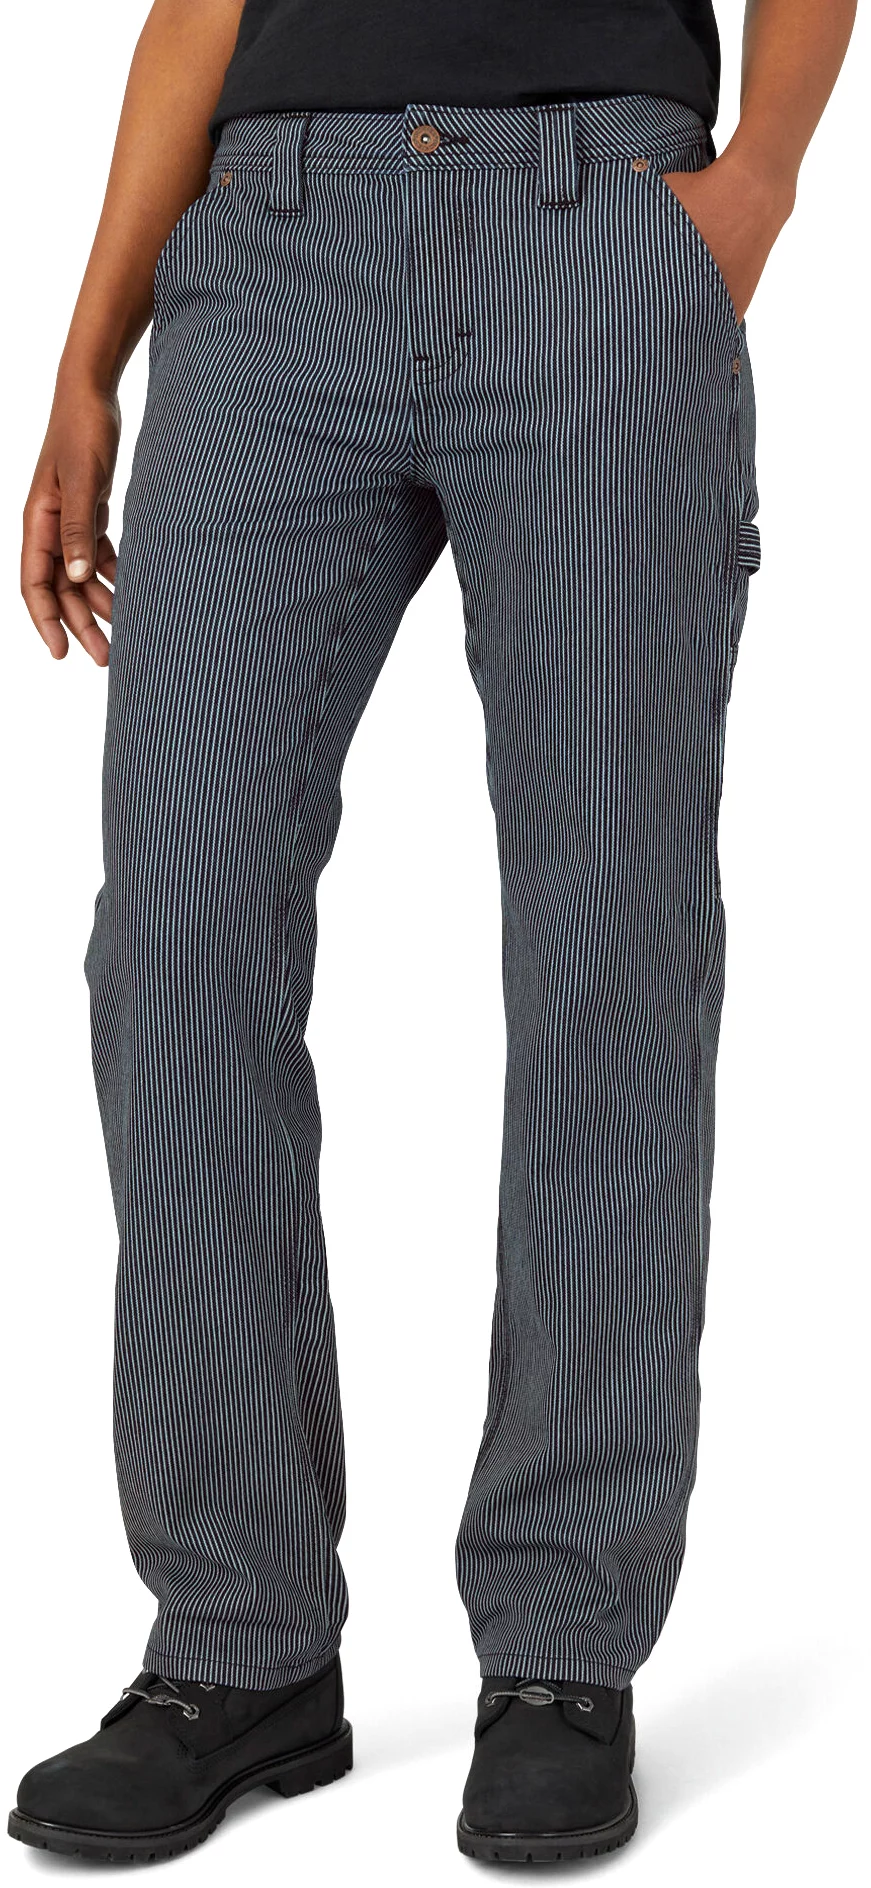 Dickies Women's Carpenter Hickory Stripe Pants - rinsed hickory